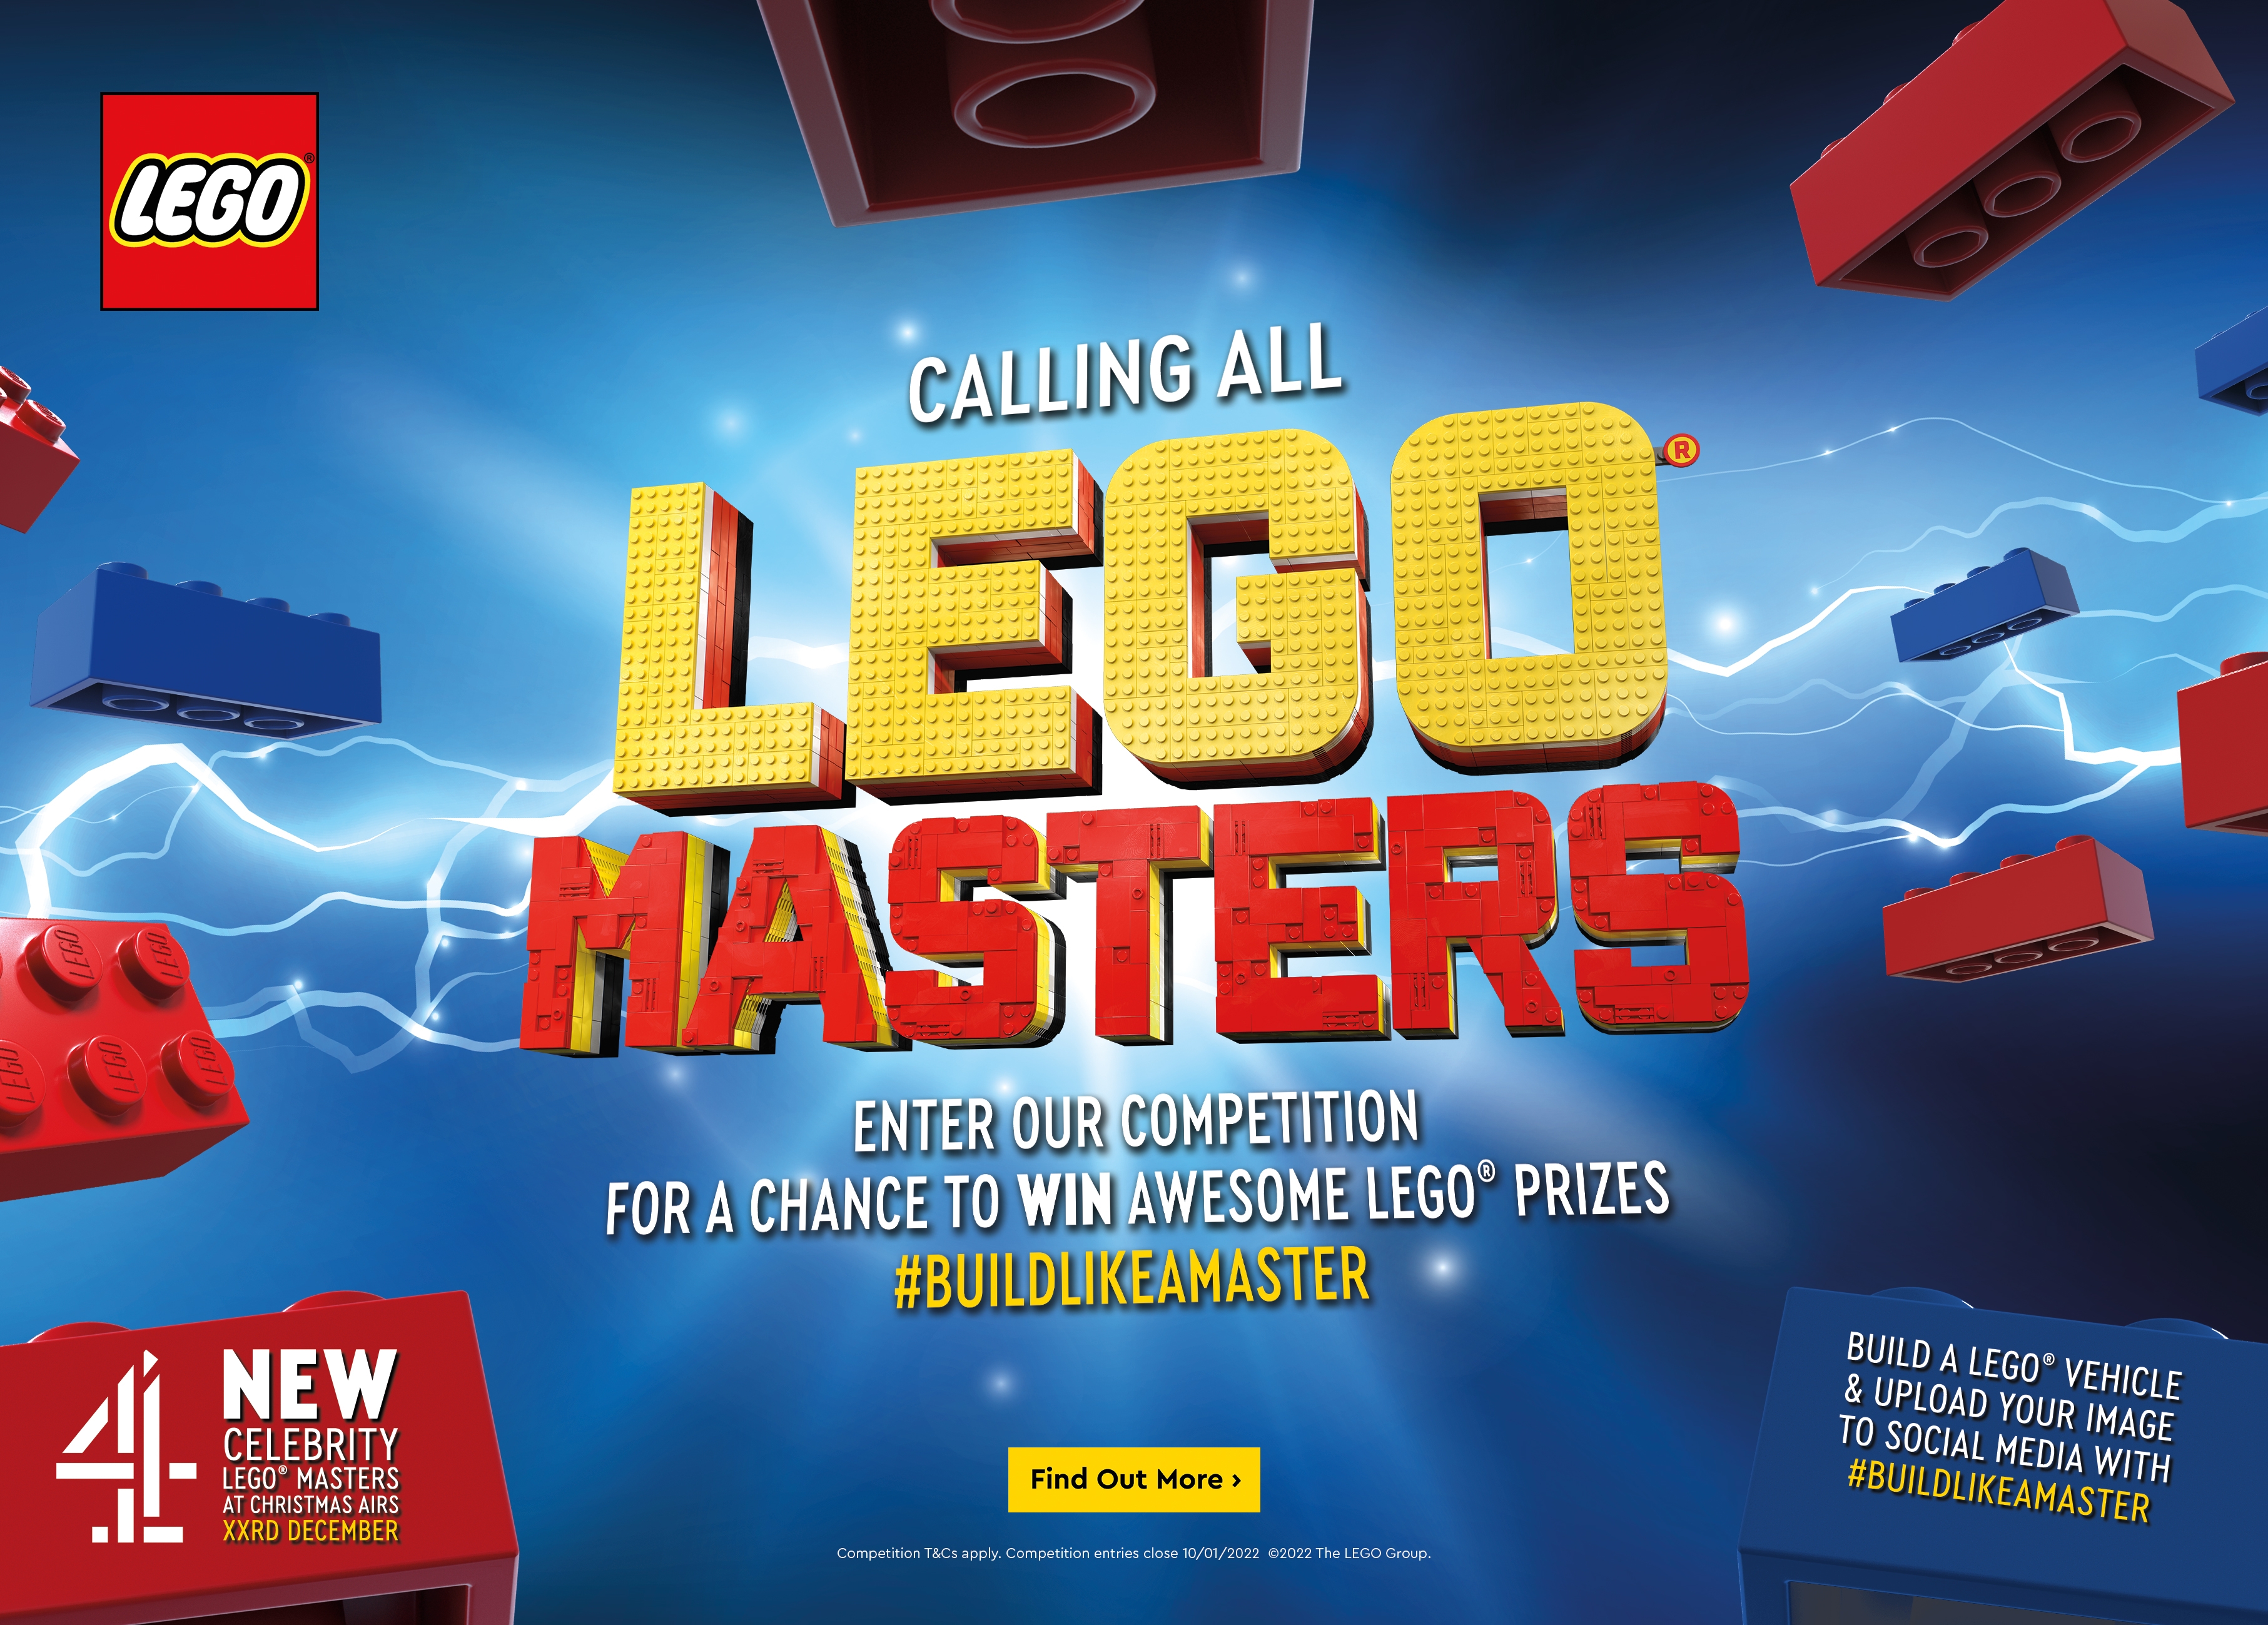 Are you ready to build a Master? | LEGO.com for GB